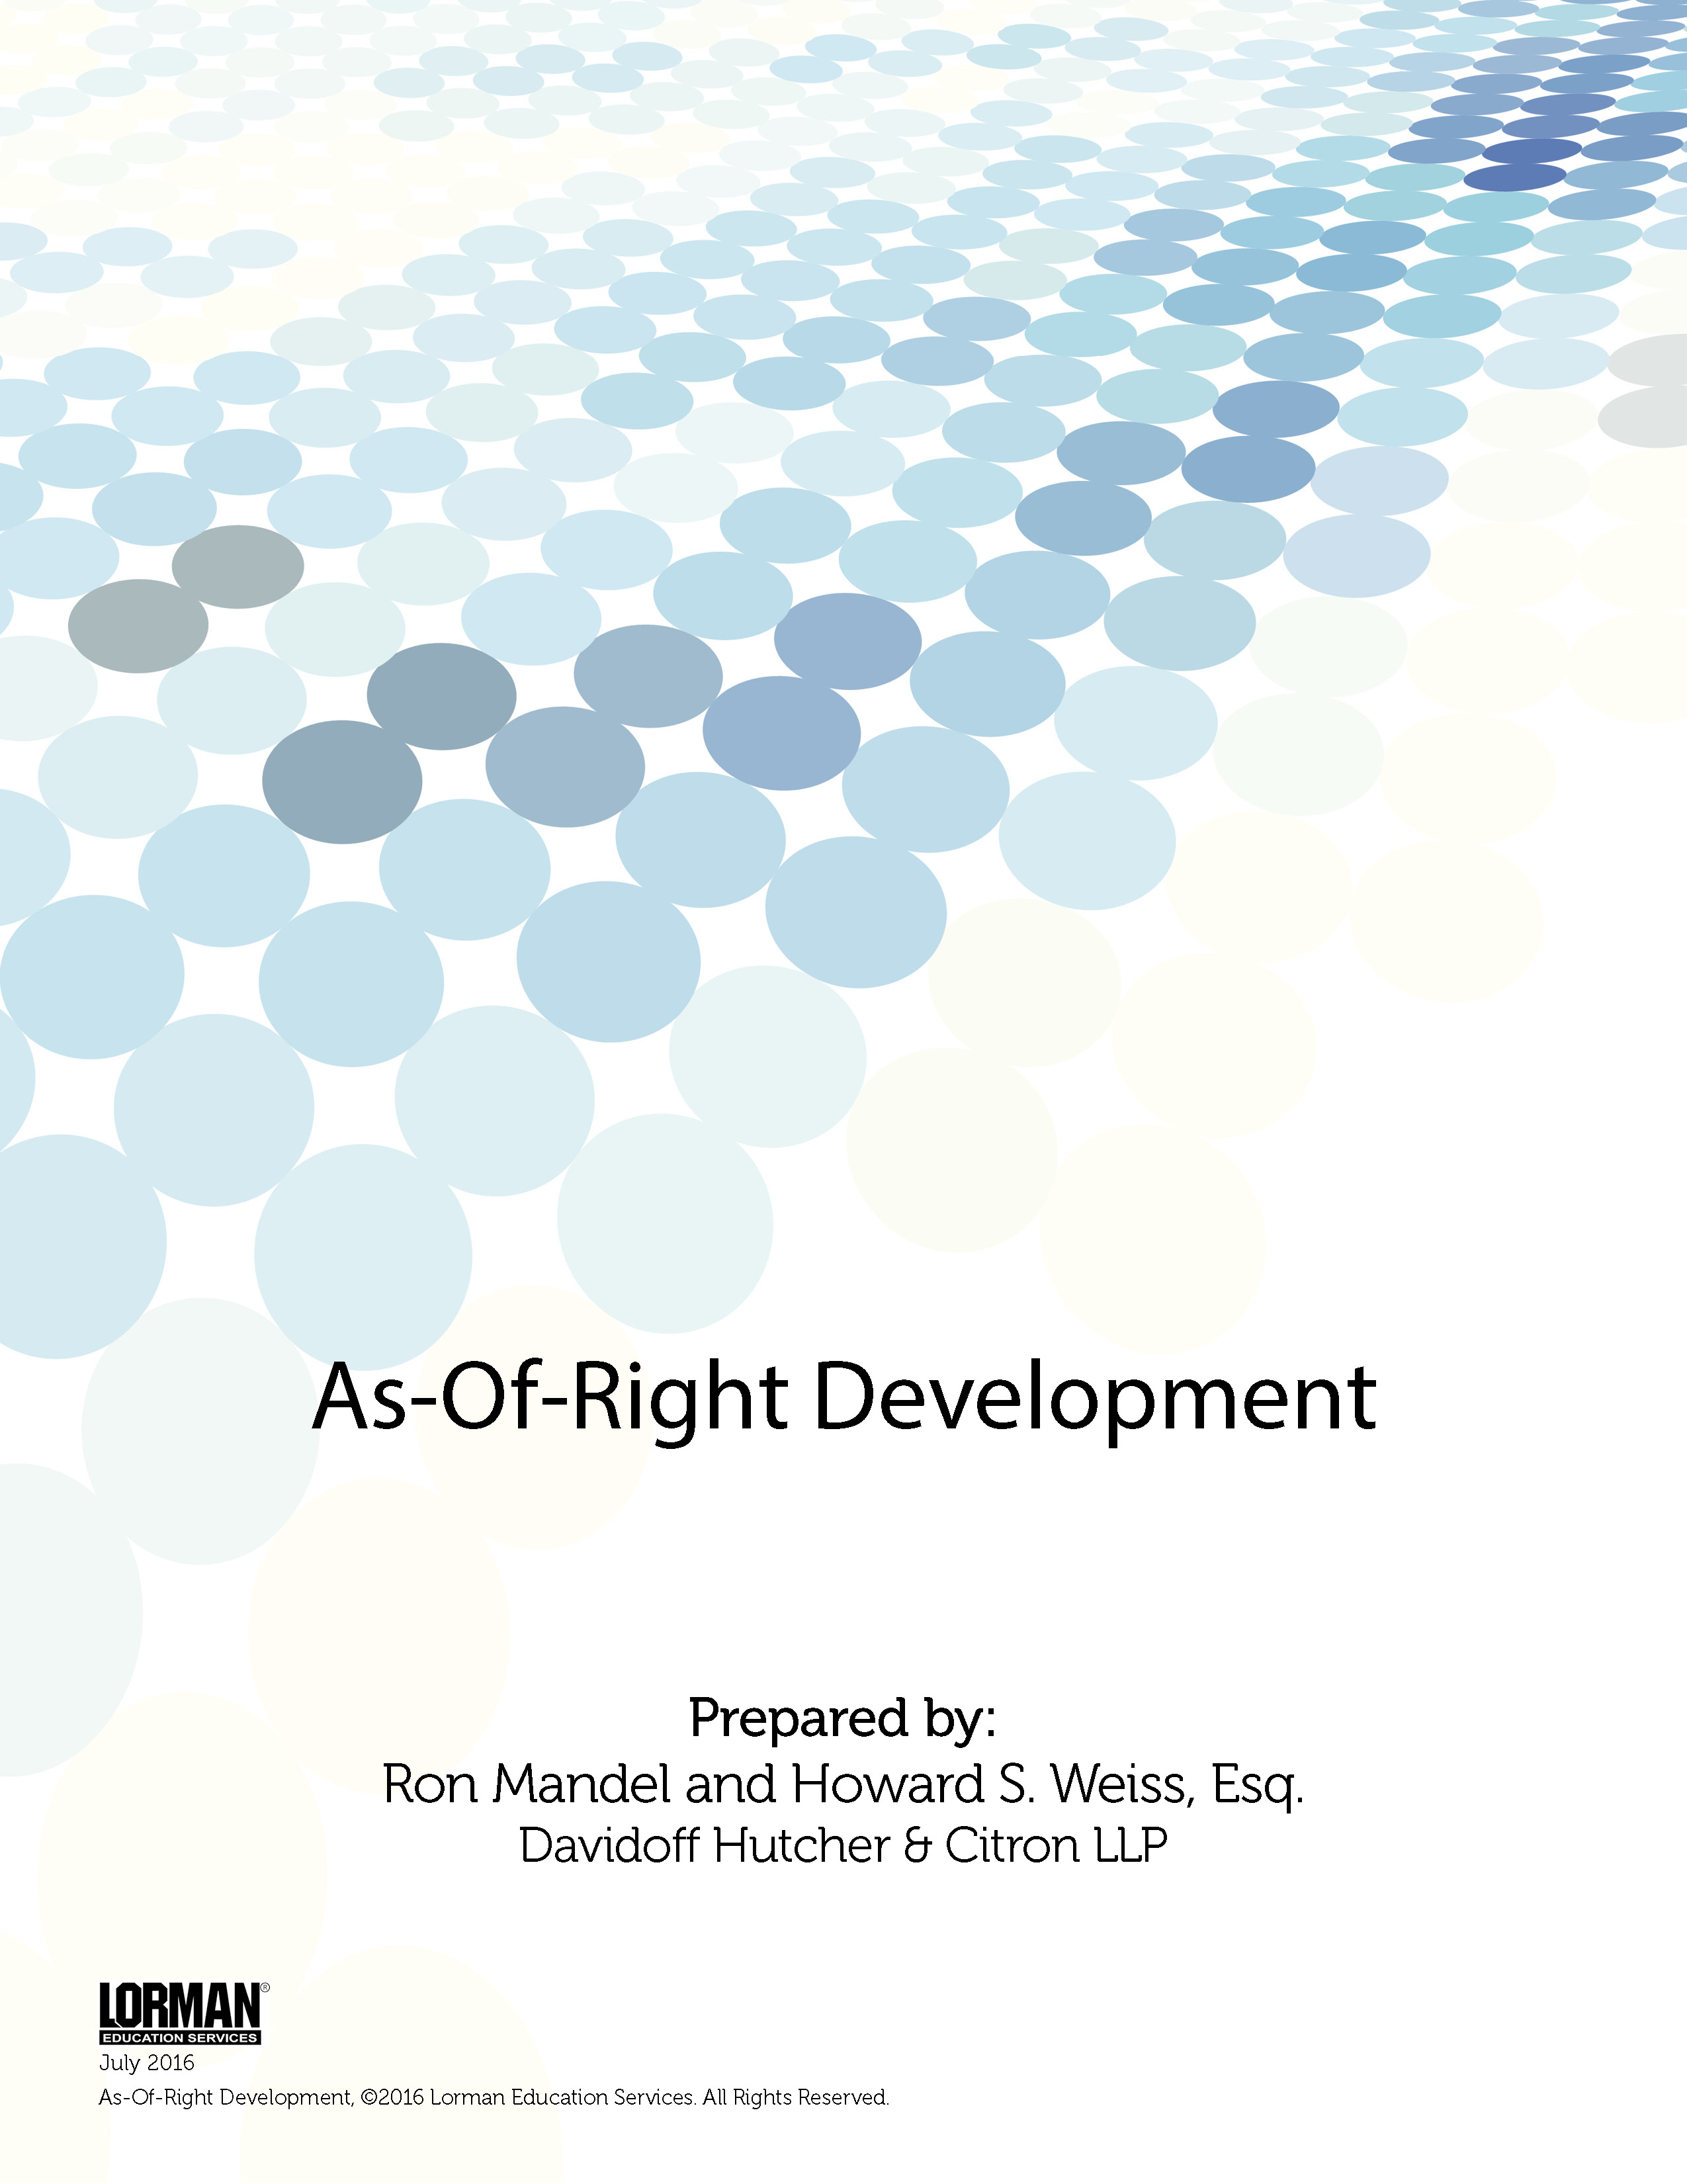 As-Of-Right Development